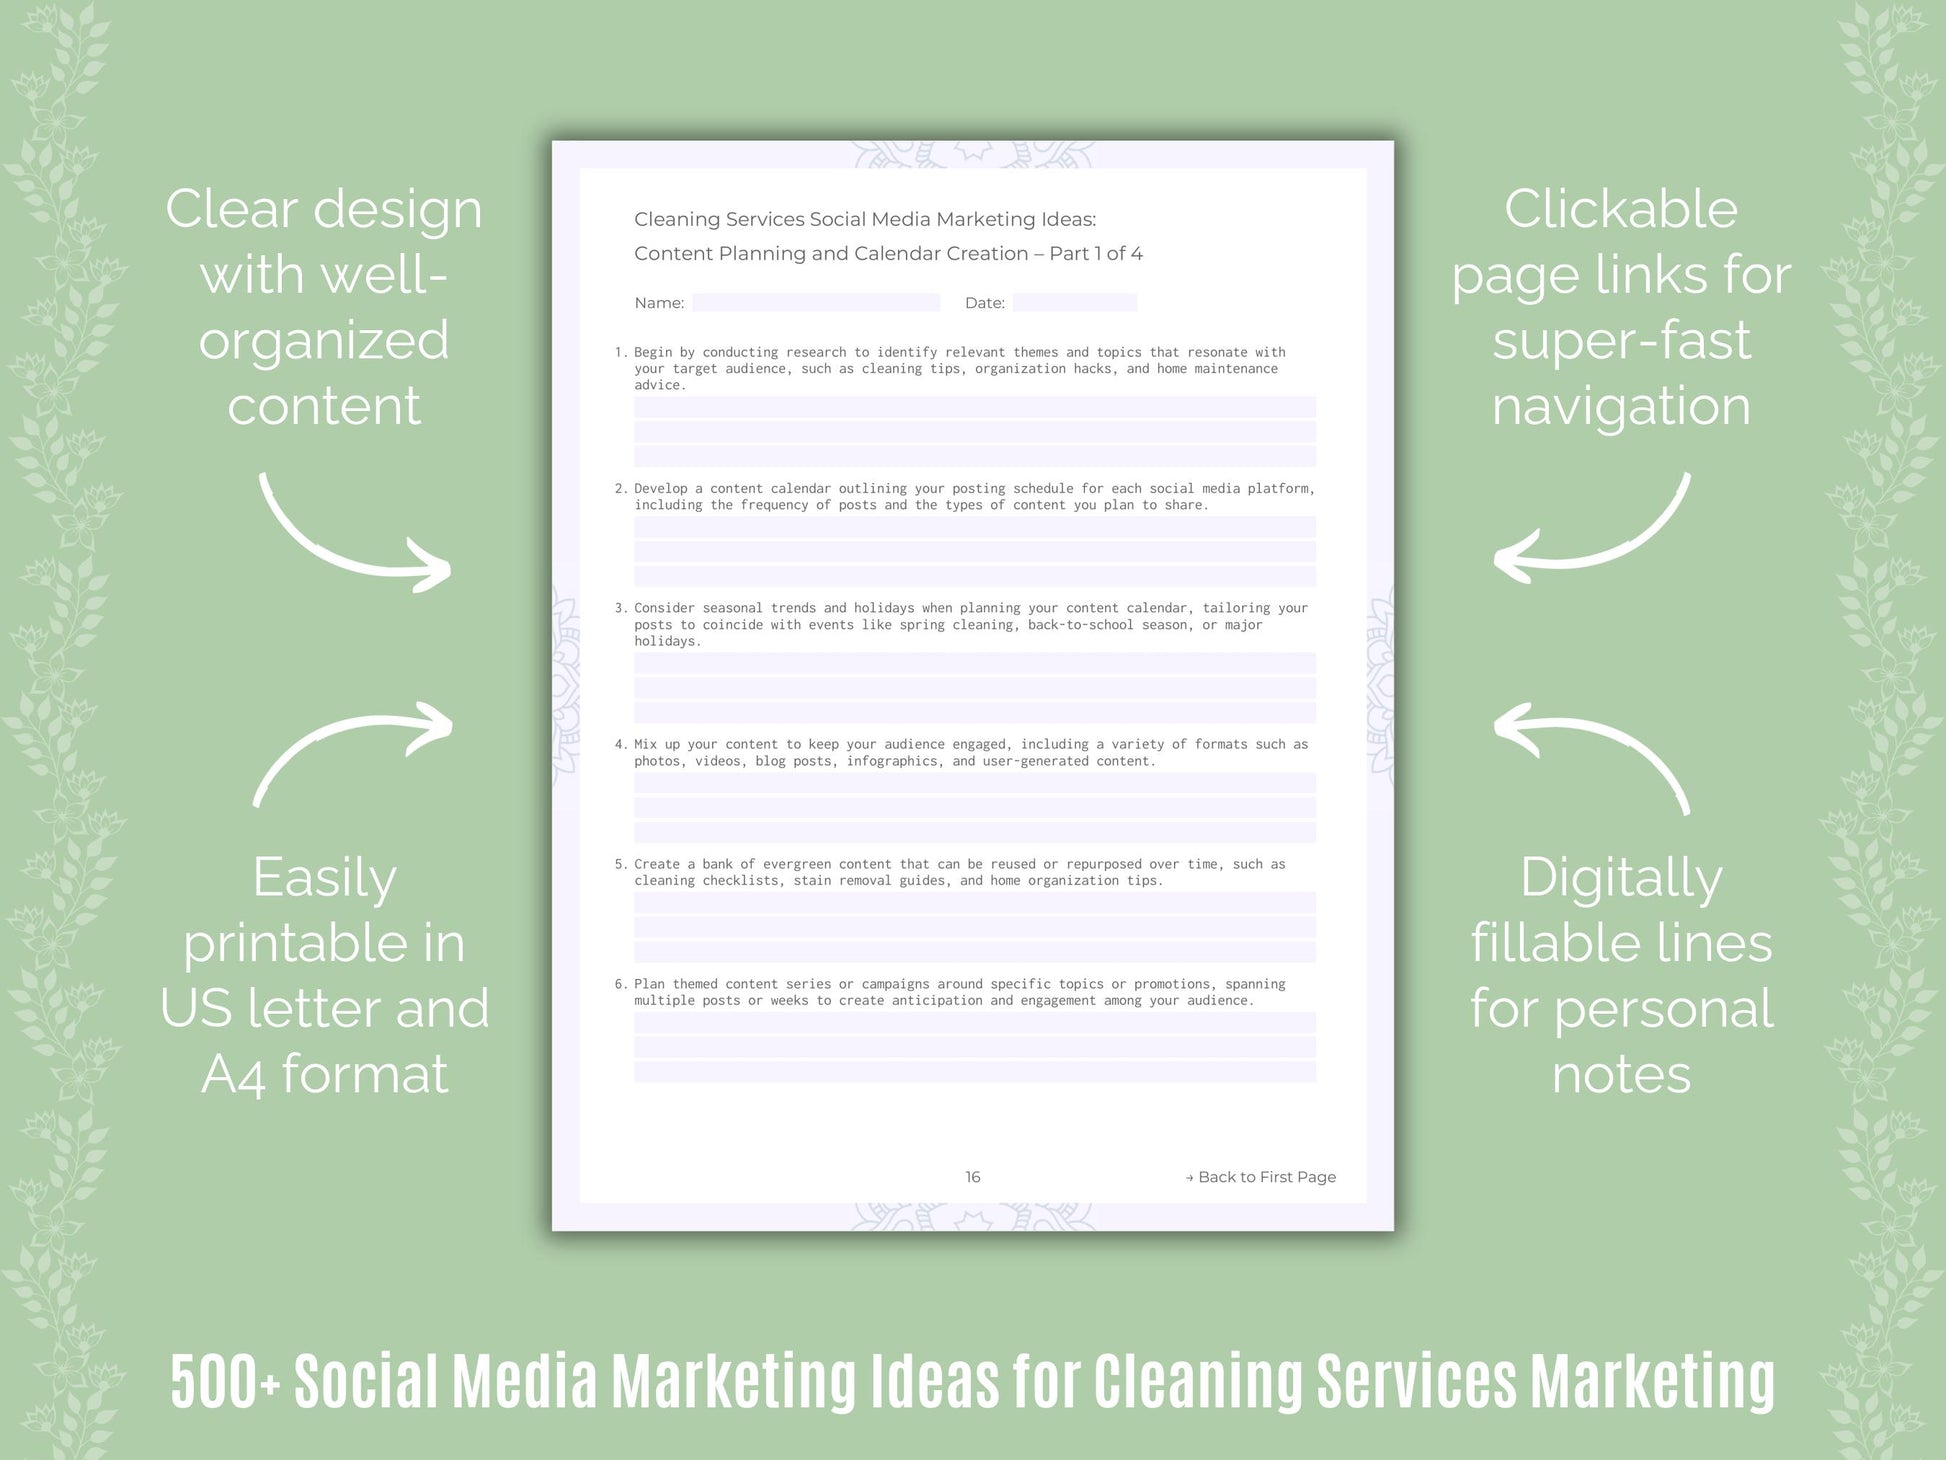 Cleaning Services Marketing